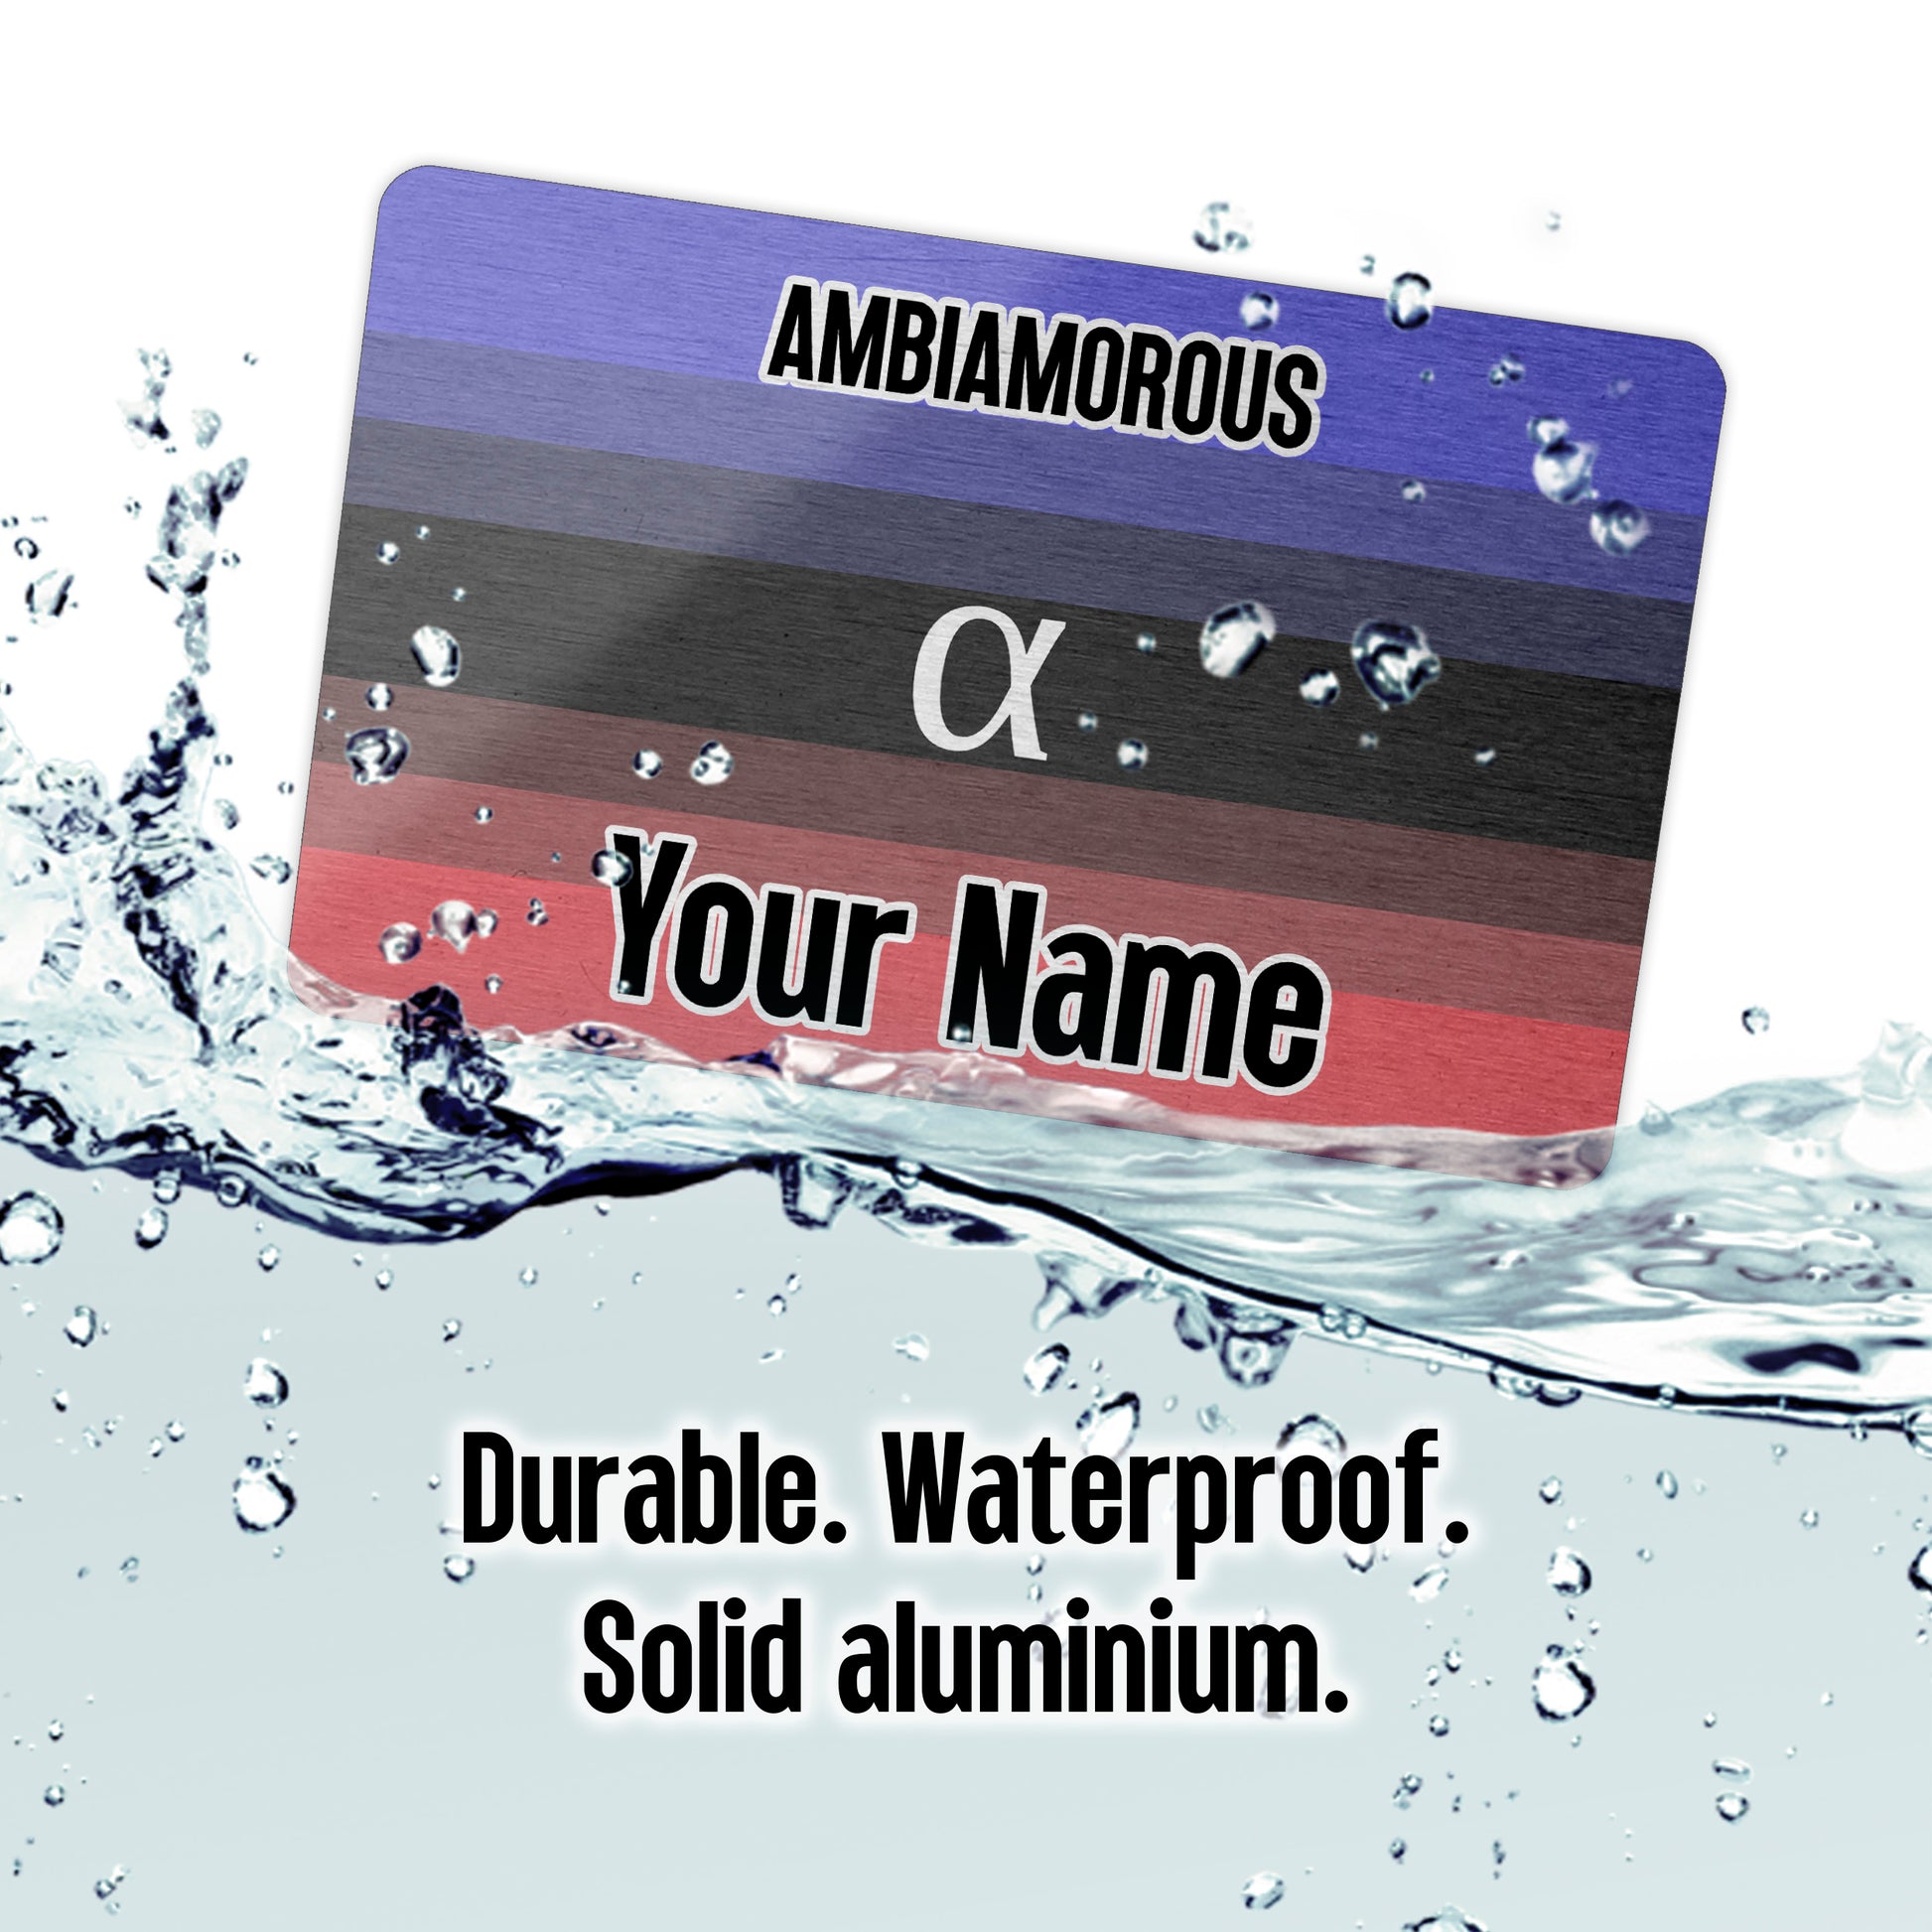 Aluminium wallet card personalised with your name and the ambiamorous pride flag